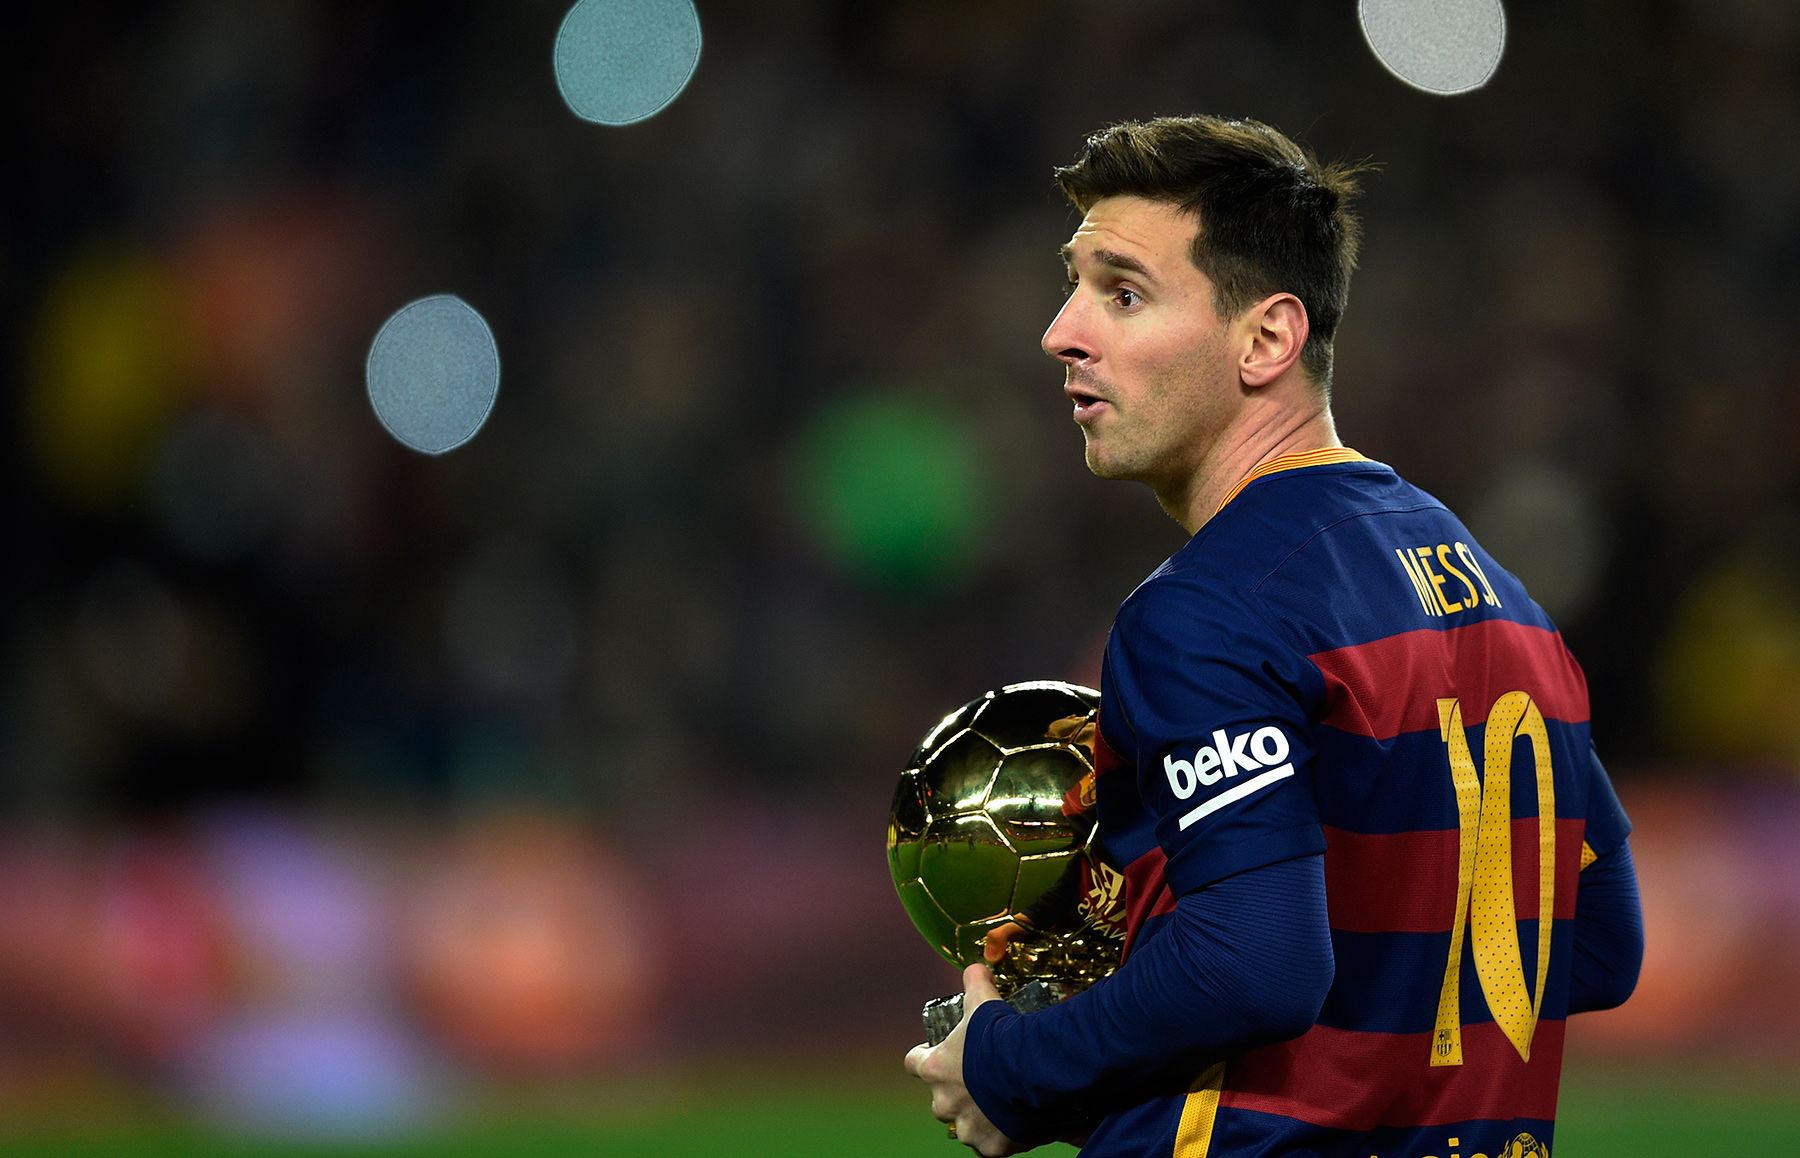 Leo Messi, showing his last Ballon d'Or to the fans of Camp Nou